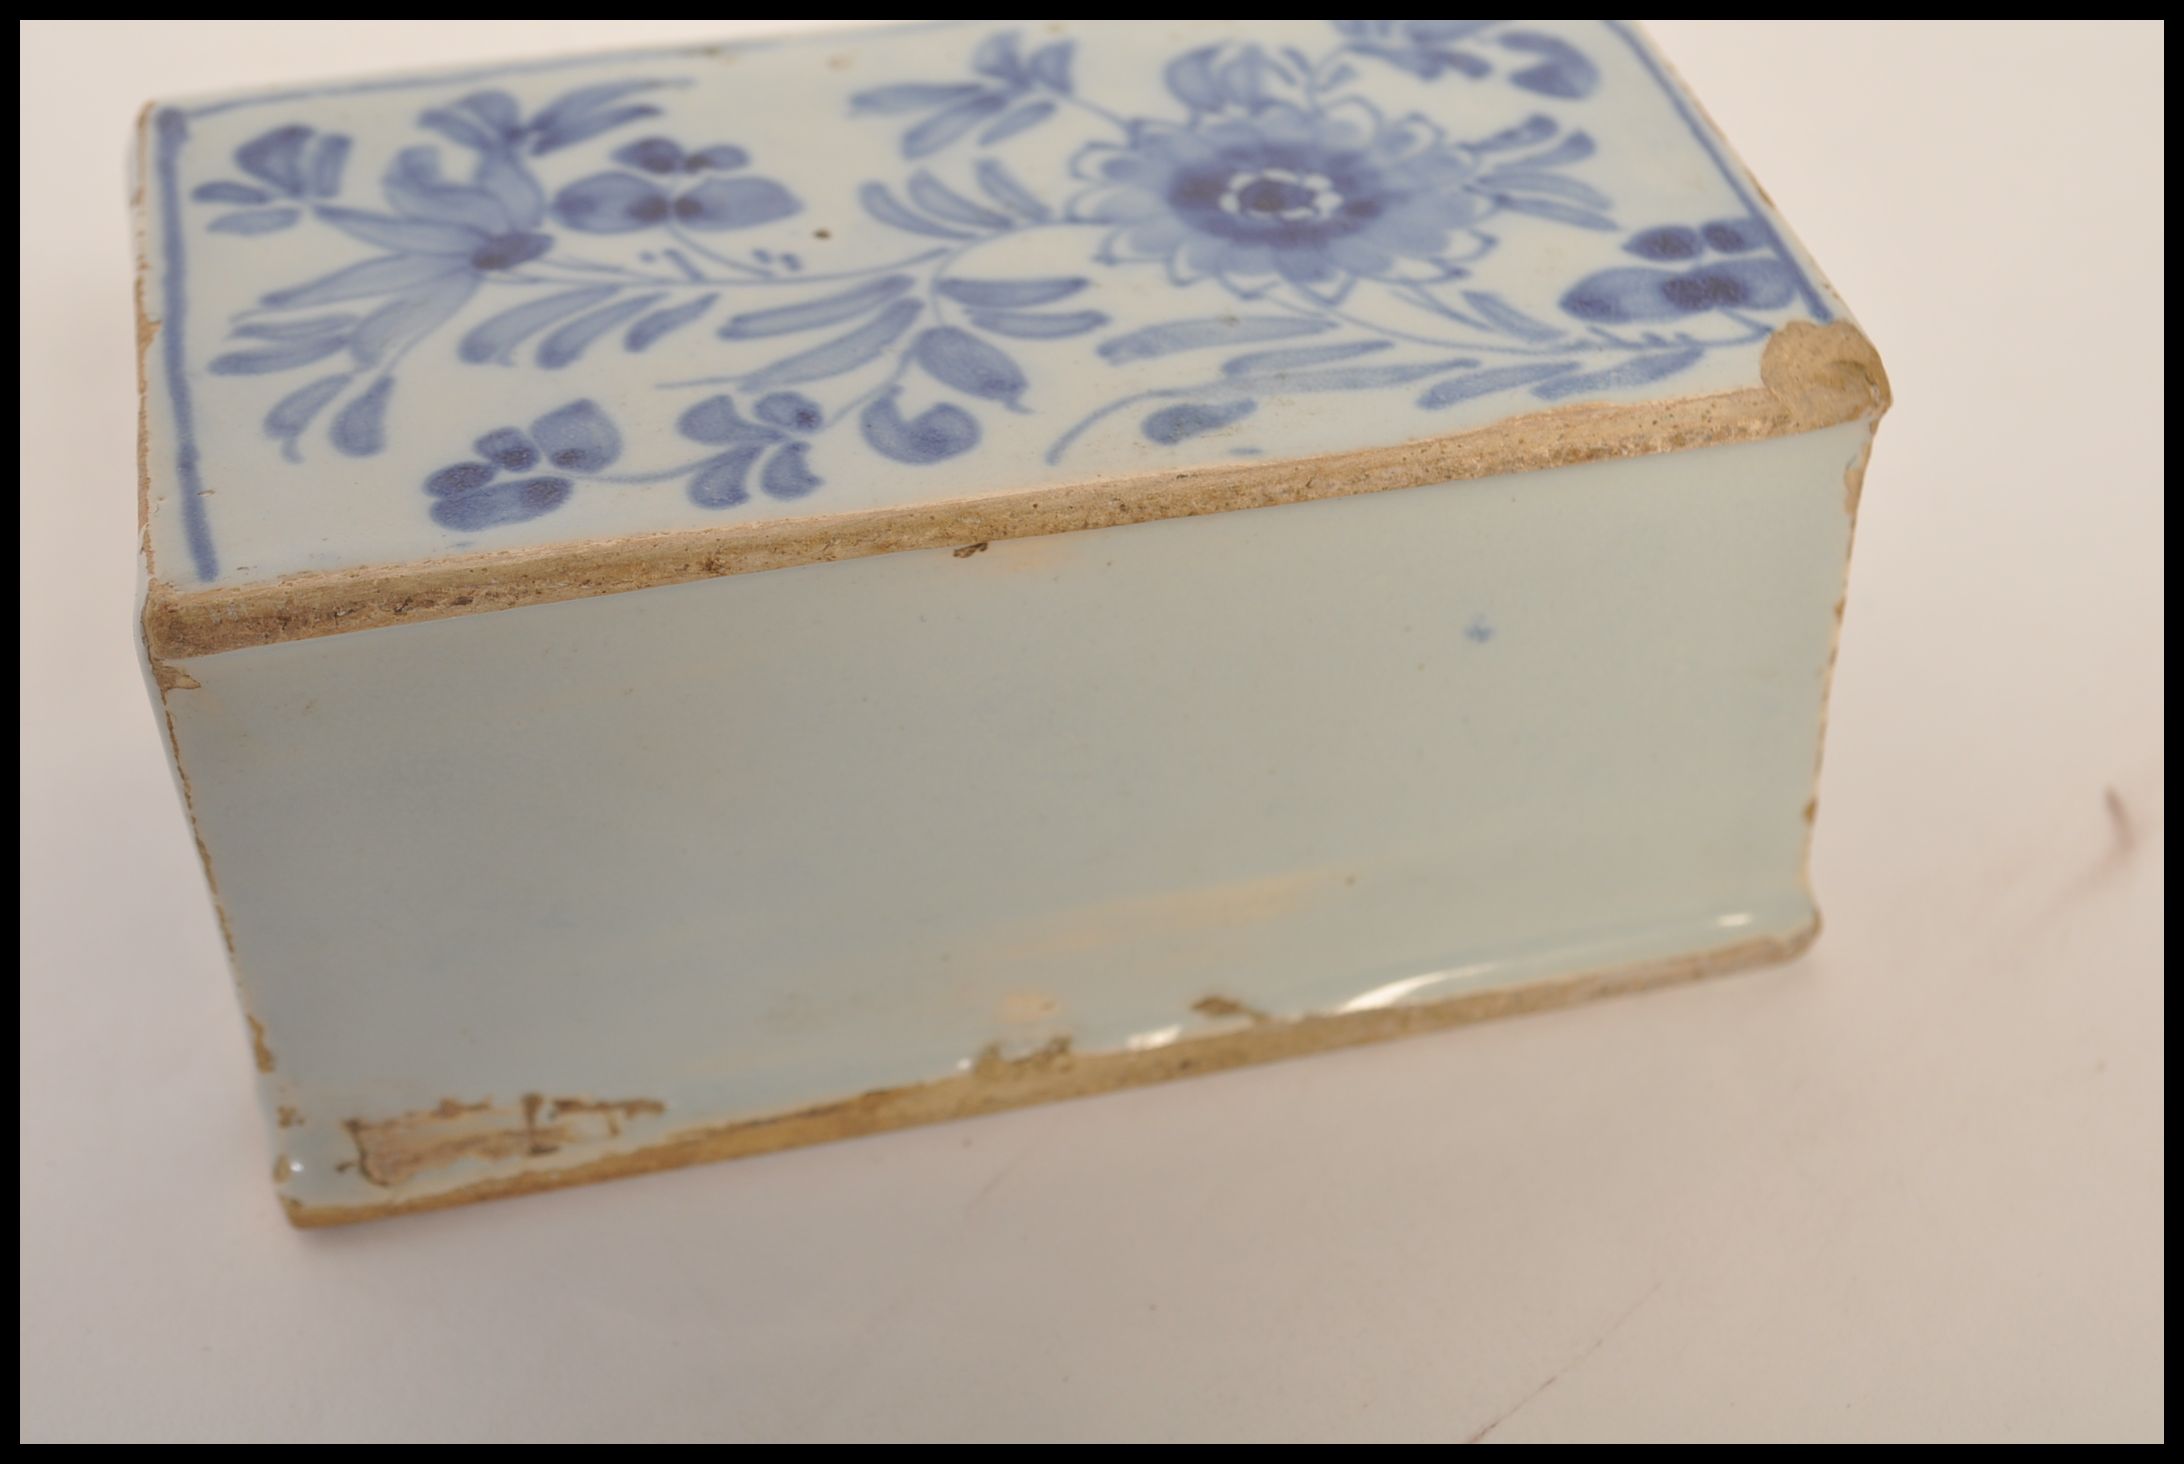 18TH CENTURY ENGLISH DELFT BLUE AND WHITE FLOWER BRICK - Image 4 of 5